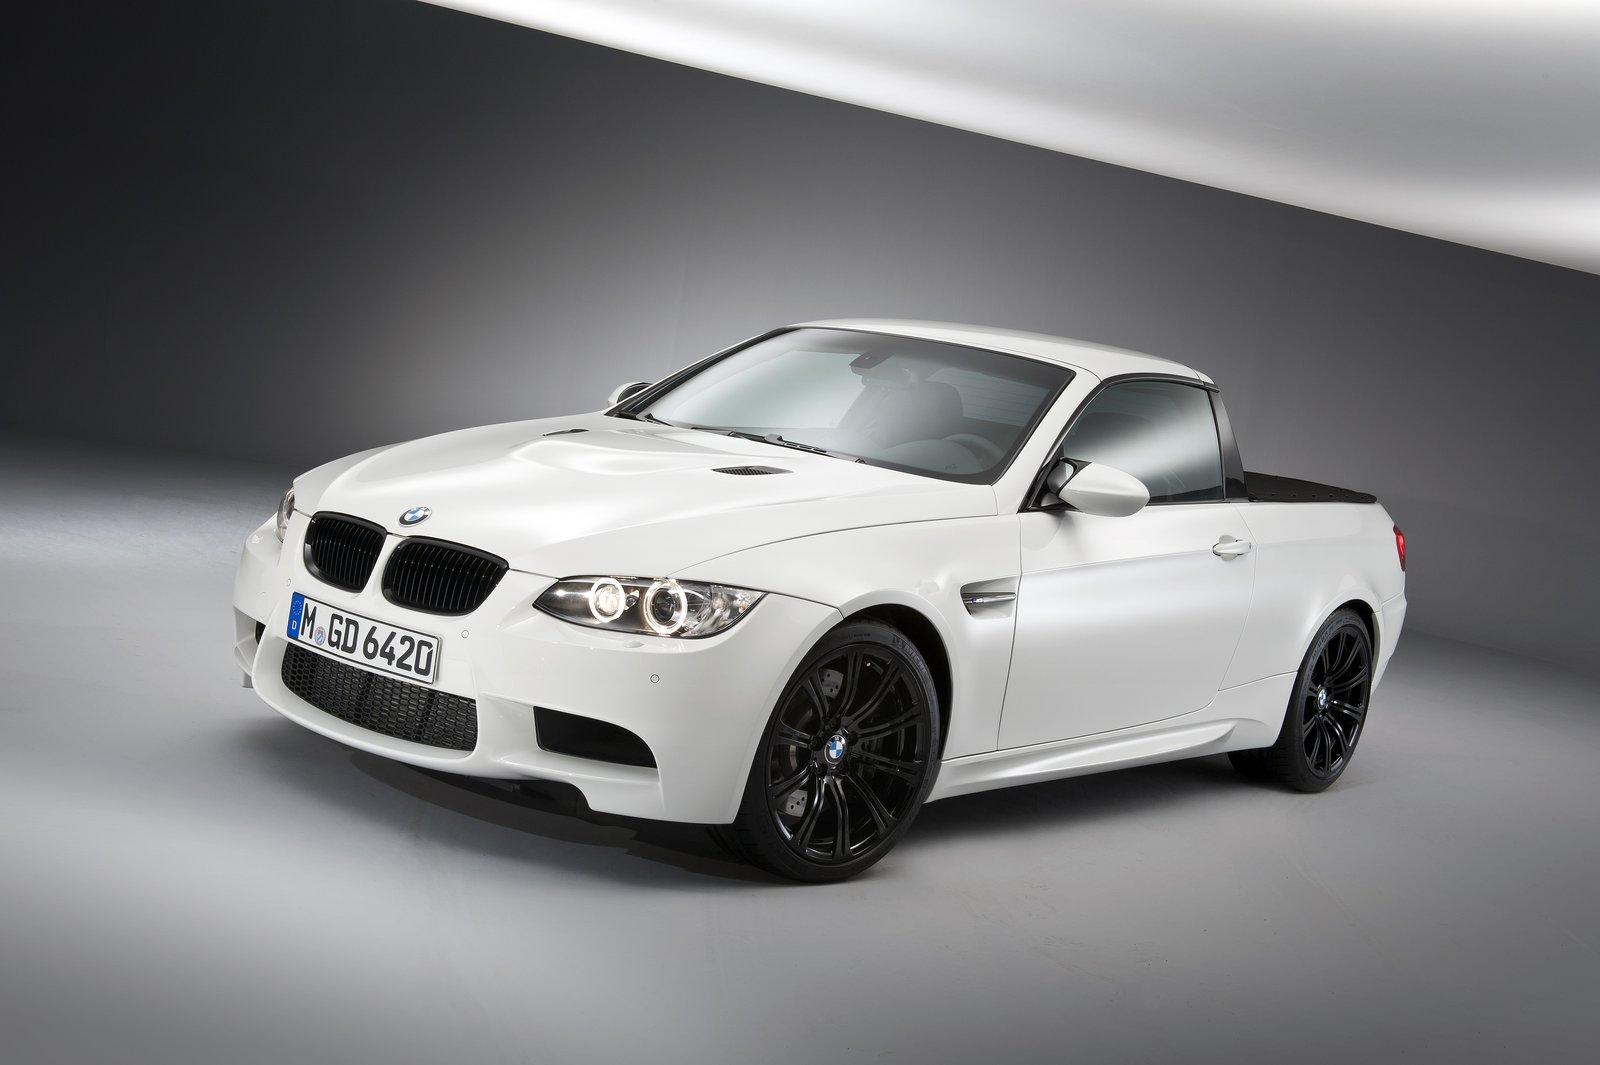 BMW officially revealed their April Fools joke – the BMW M3 pickup